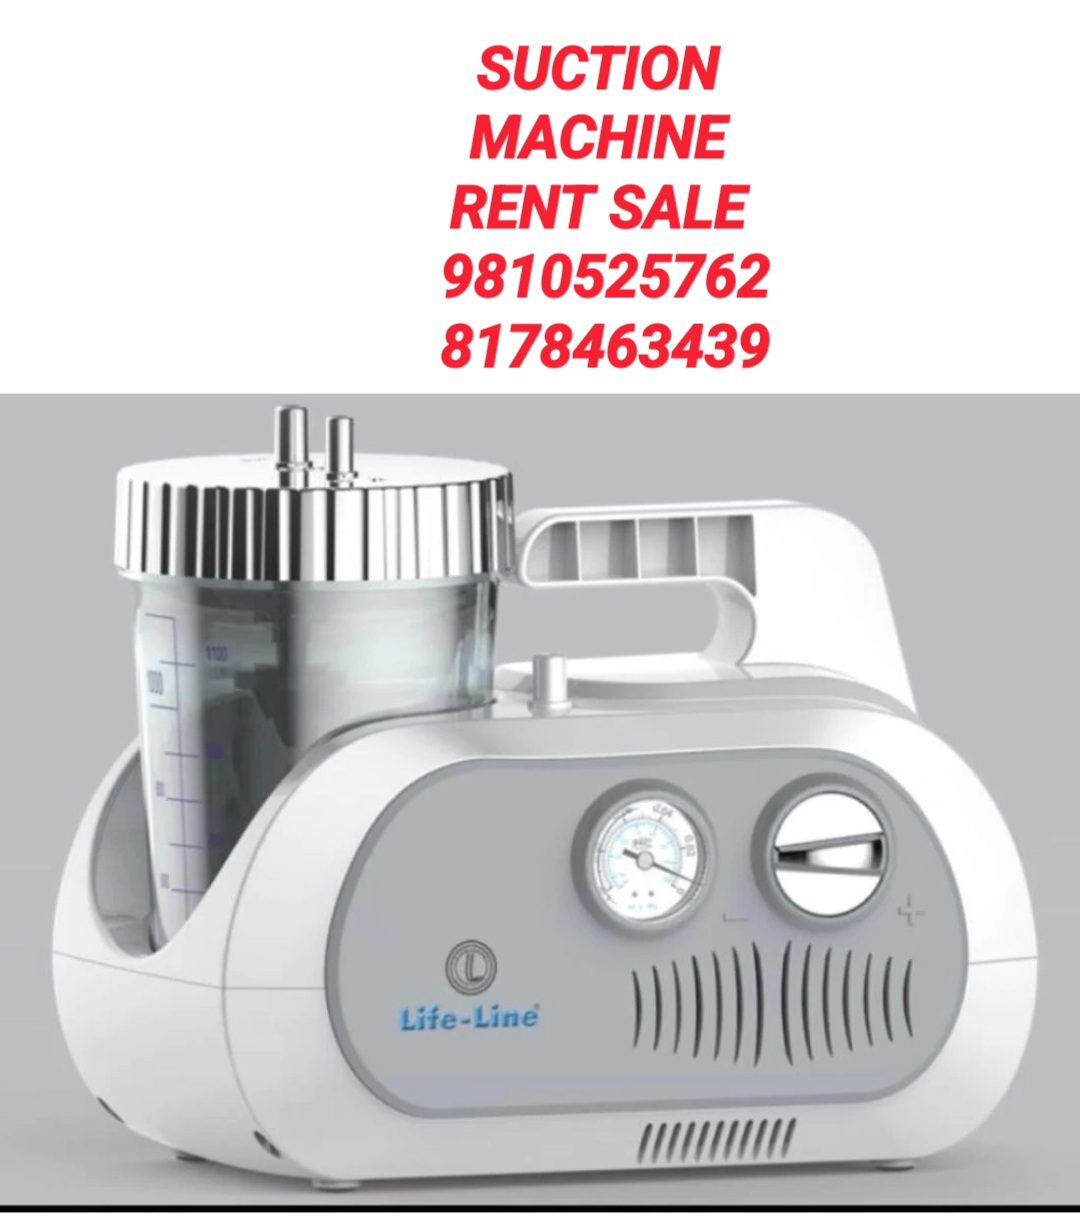 Used Suction Machine For Sale IN NOIDA 8178463439